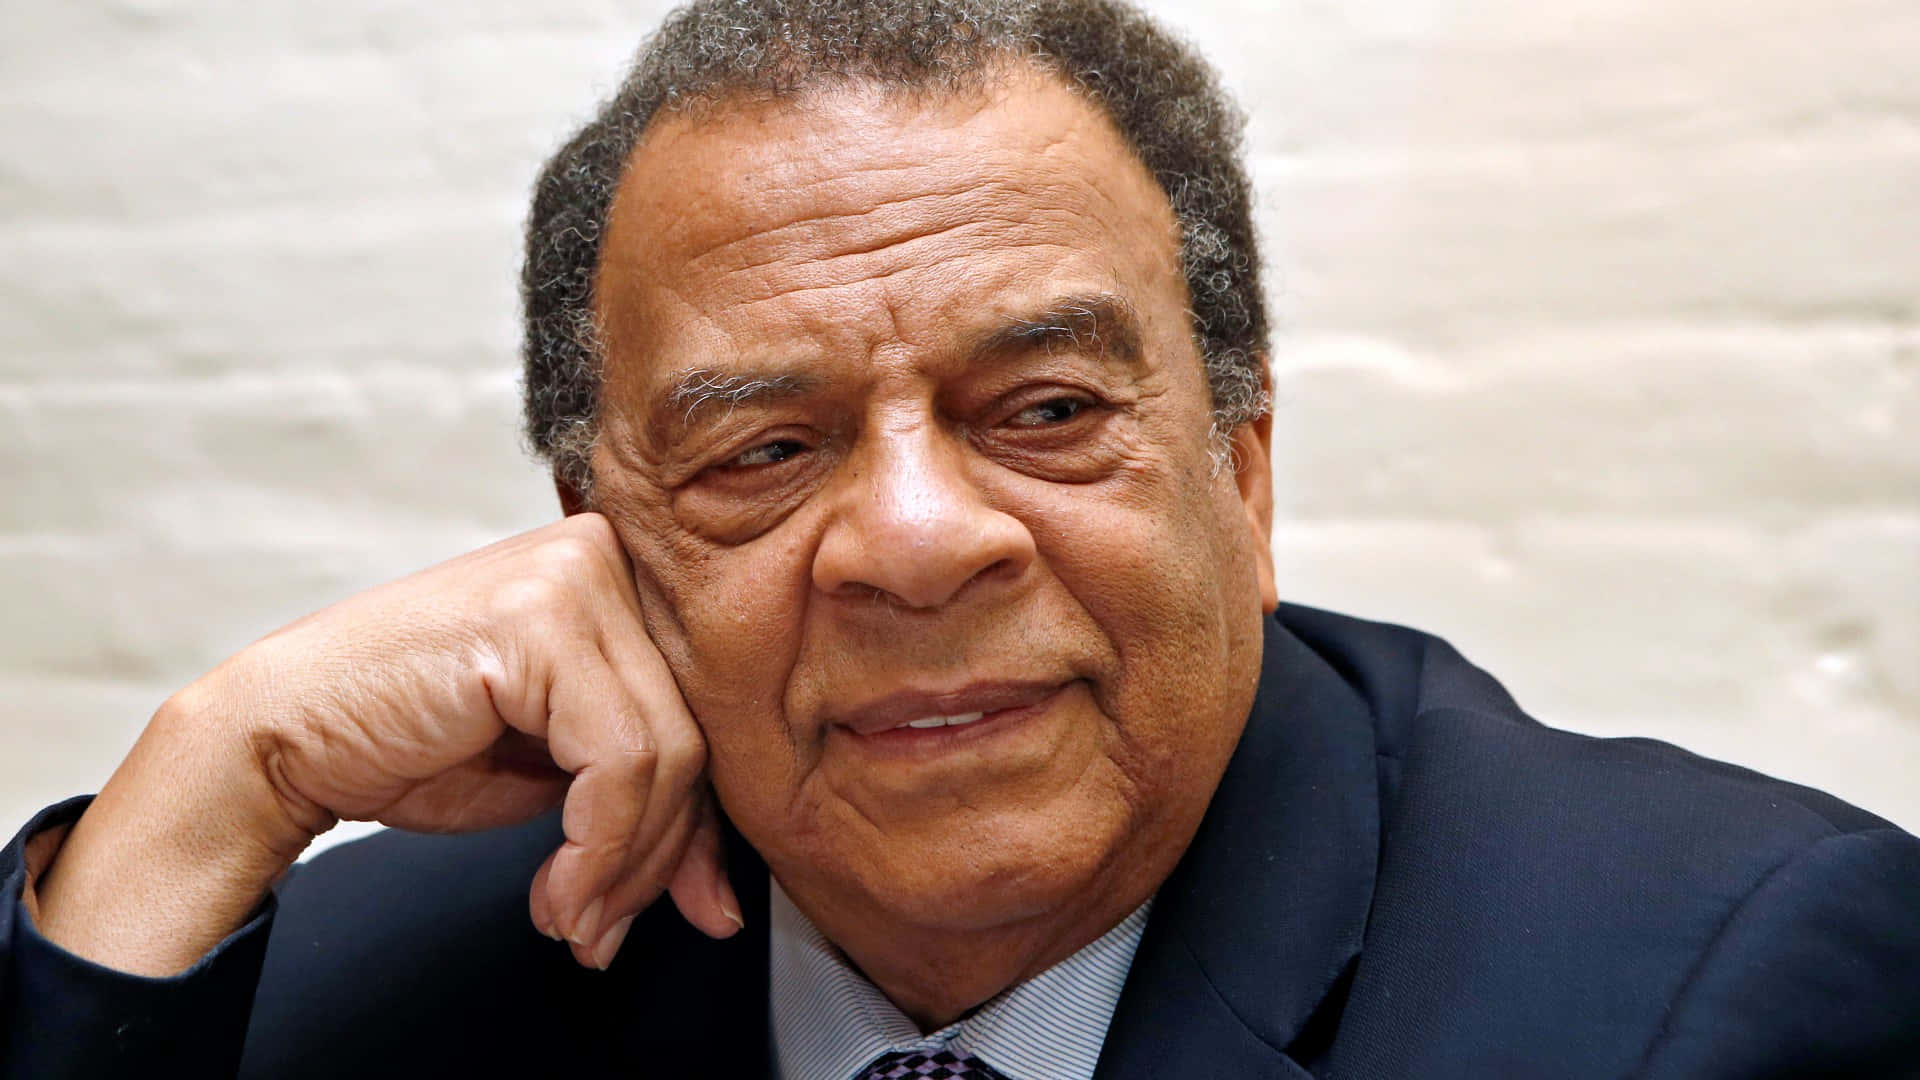 Andrew Young 1920 X 1080 Wallpaper